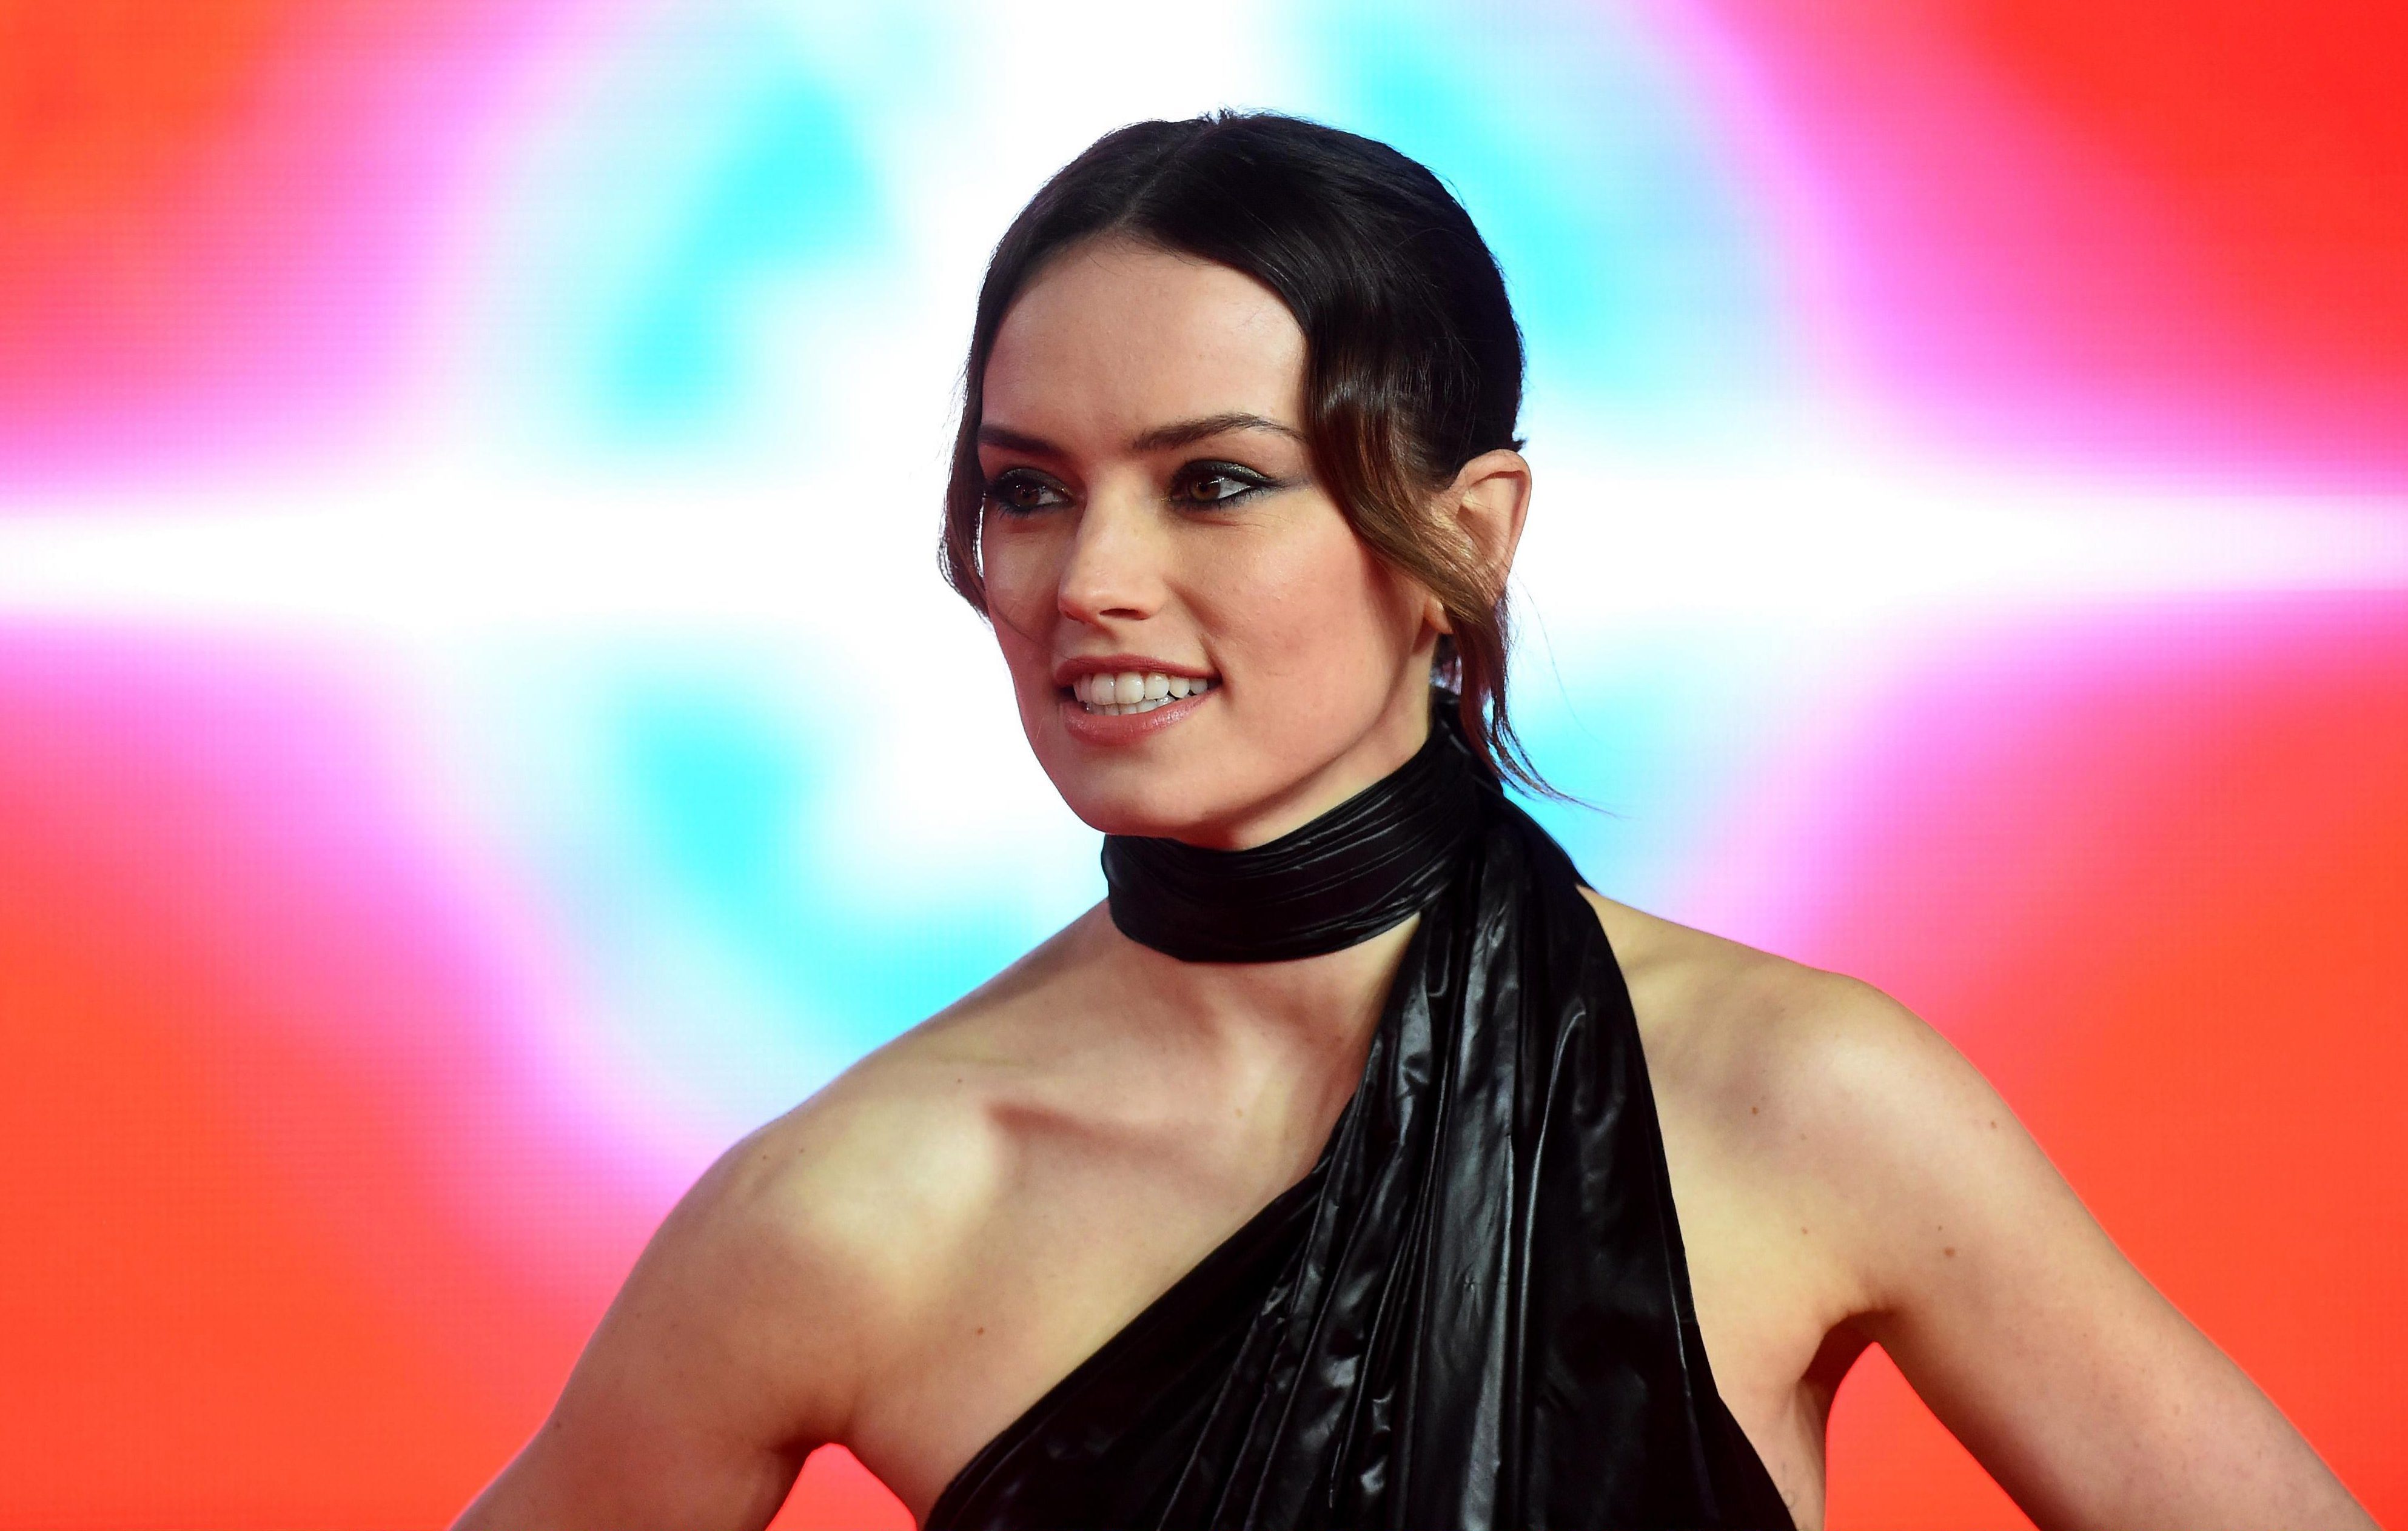 Star Wars Actress Daisy Ridley Has Been The Target Of Pervy Porn App Users